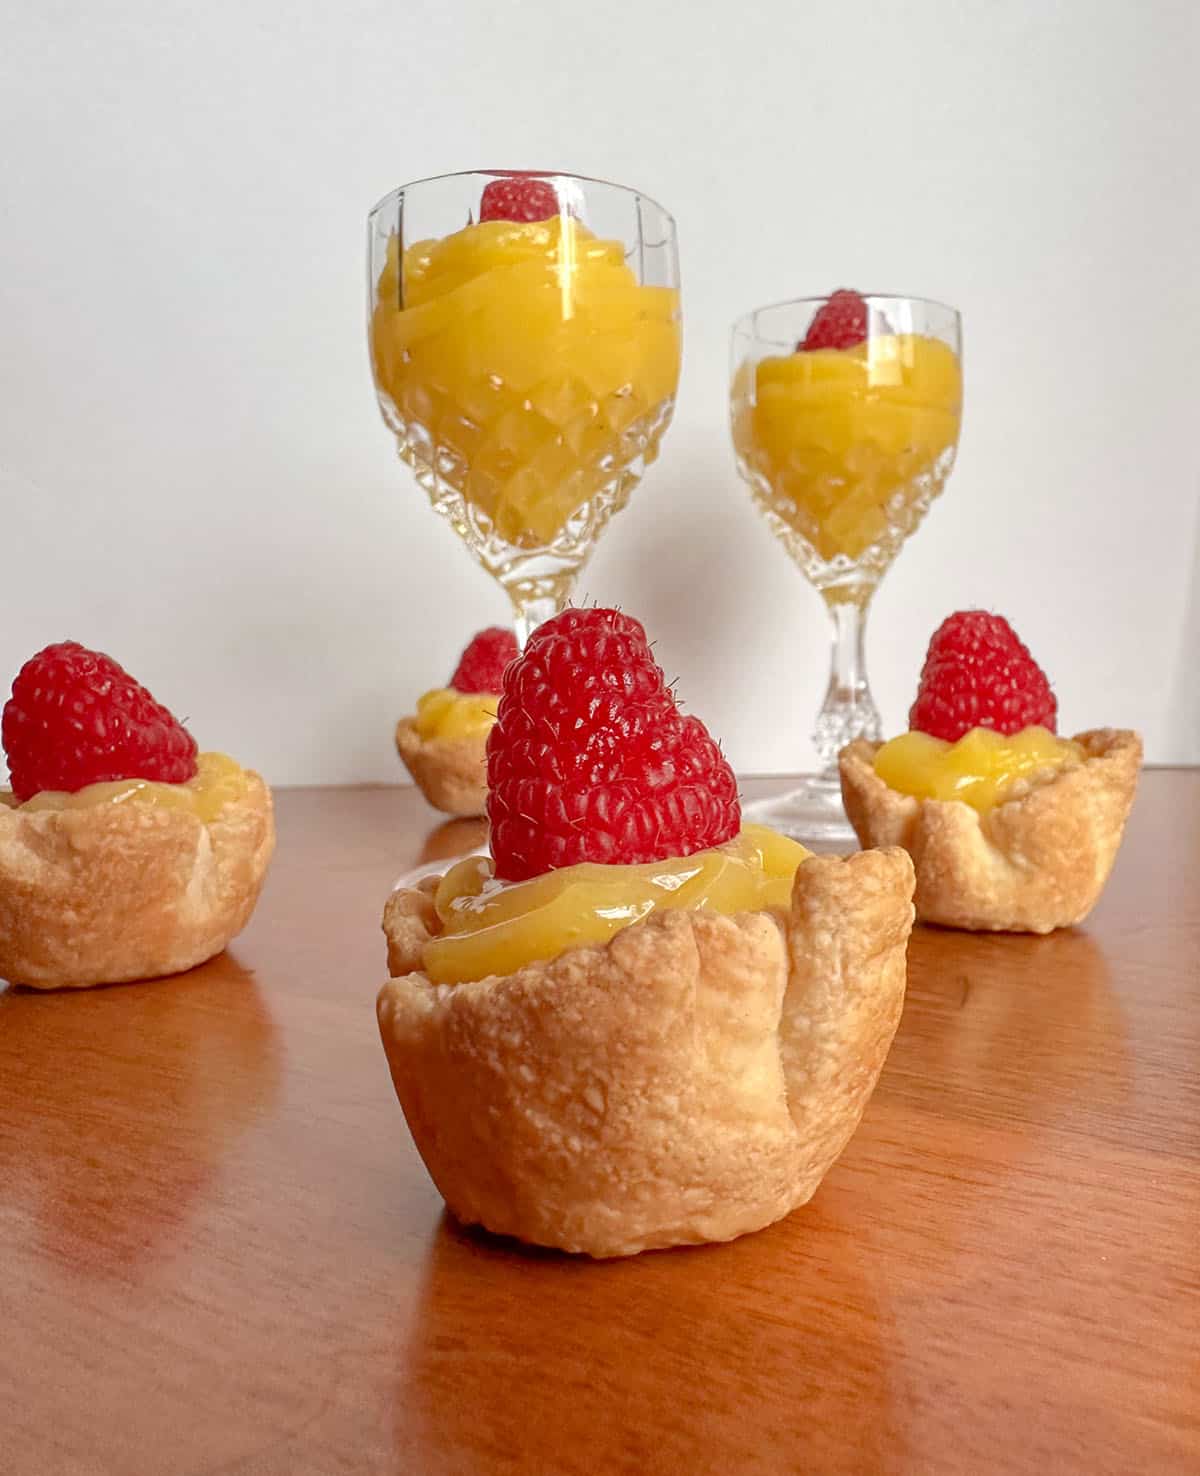 Lemon curd in pie shells and cups topped with raspberries.